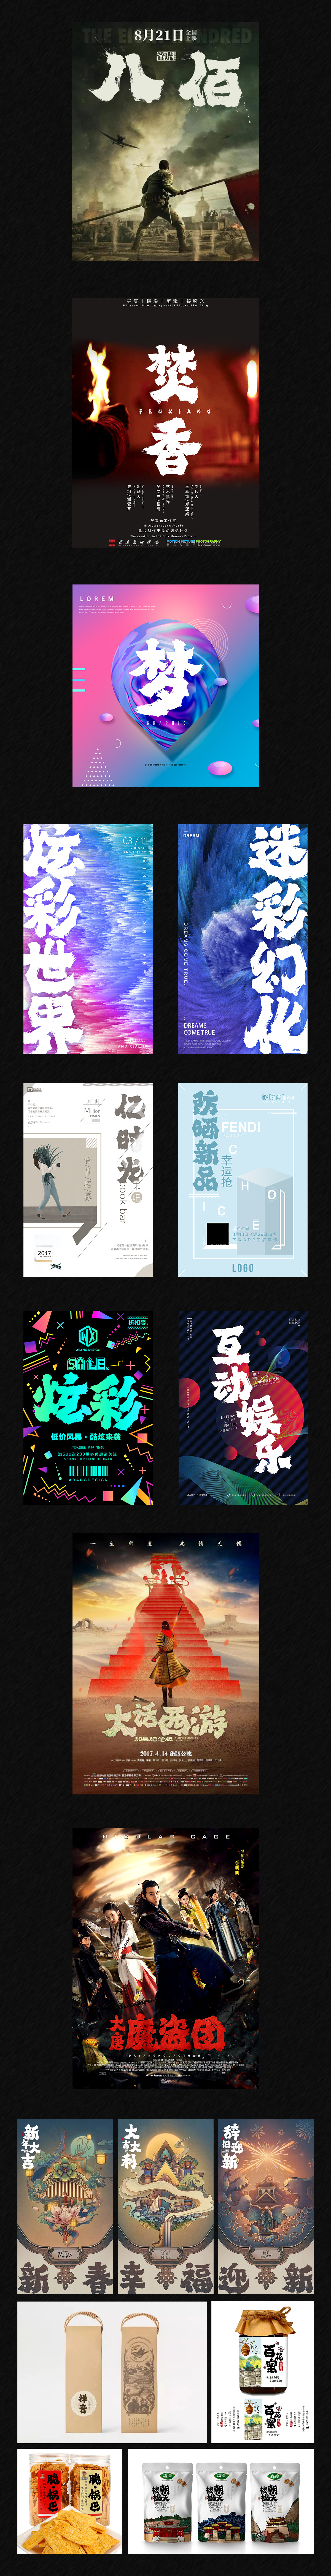 6P Collection of the latest Chinese font design schemes in 2021 #.222